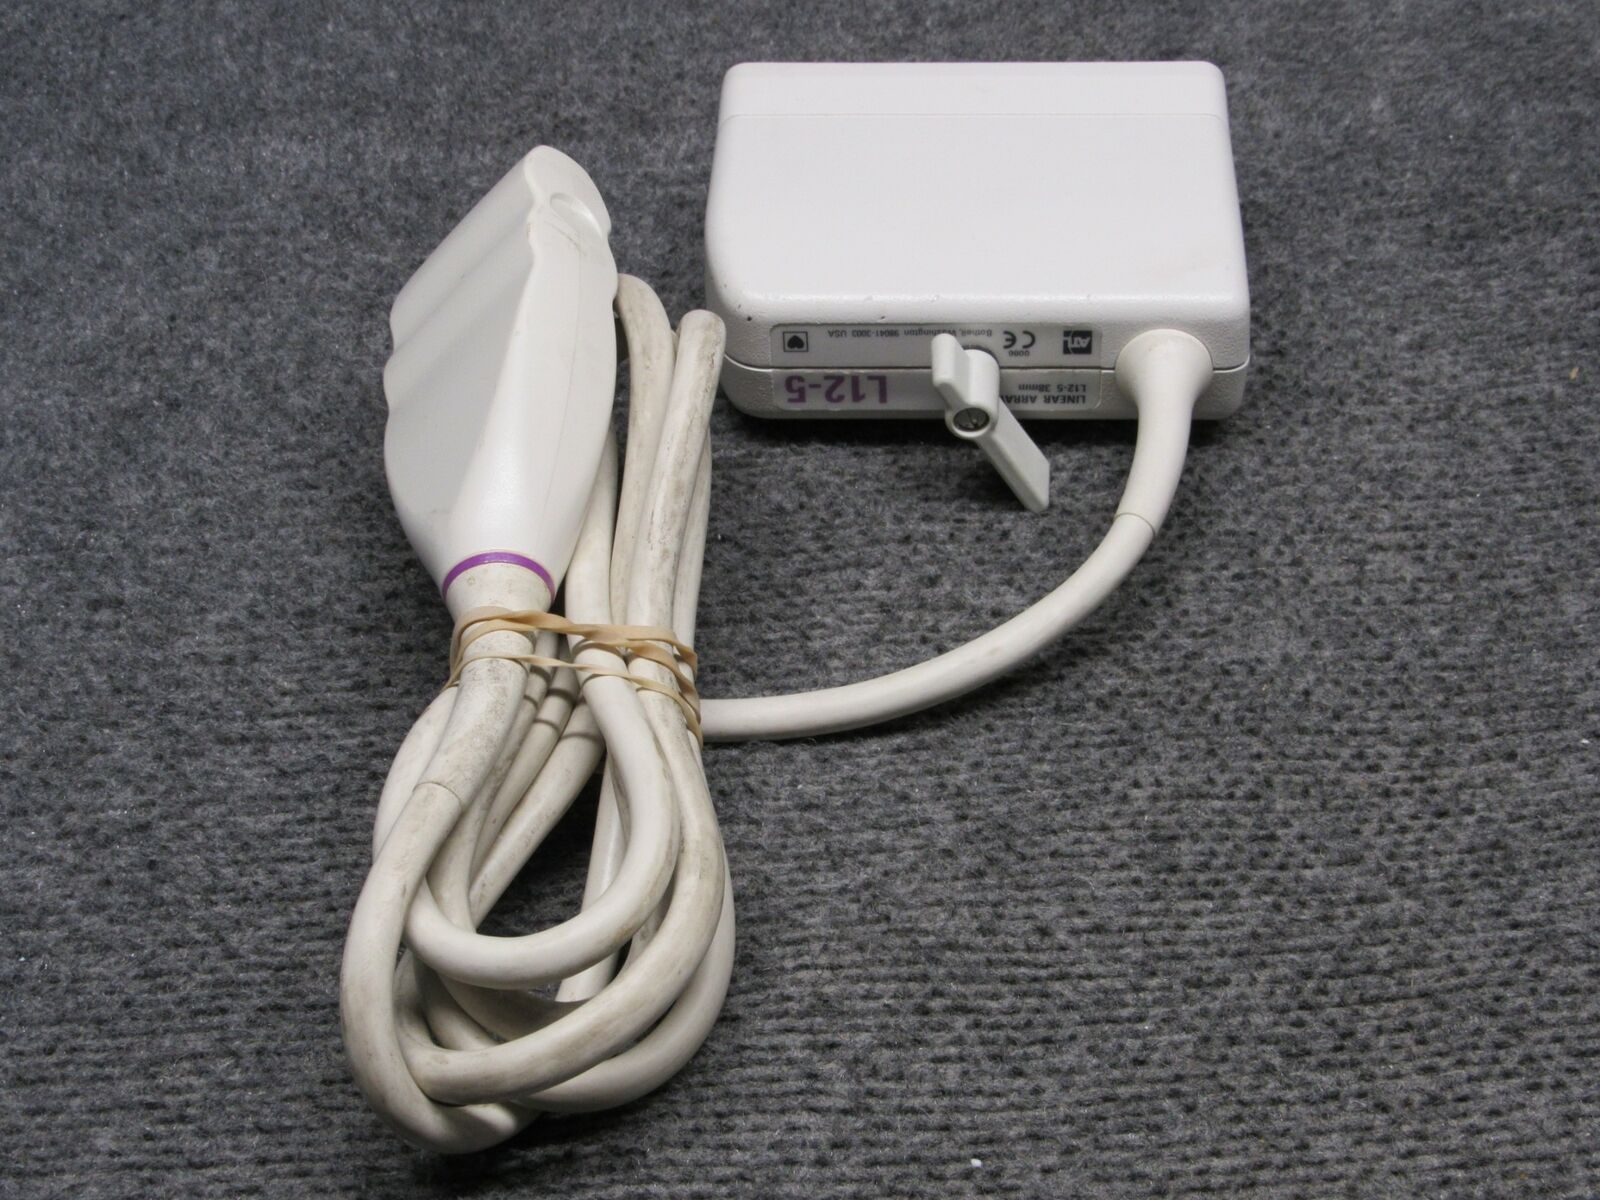 Philips ATL L12-5 38mm Linear Array Probe Transducer Ultrasound Probe  *Tested* DIAGNOSTIC ULTRASOUND MACHINES FOR SALE